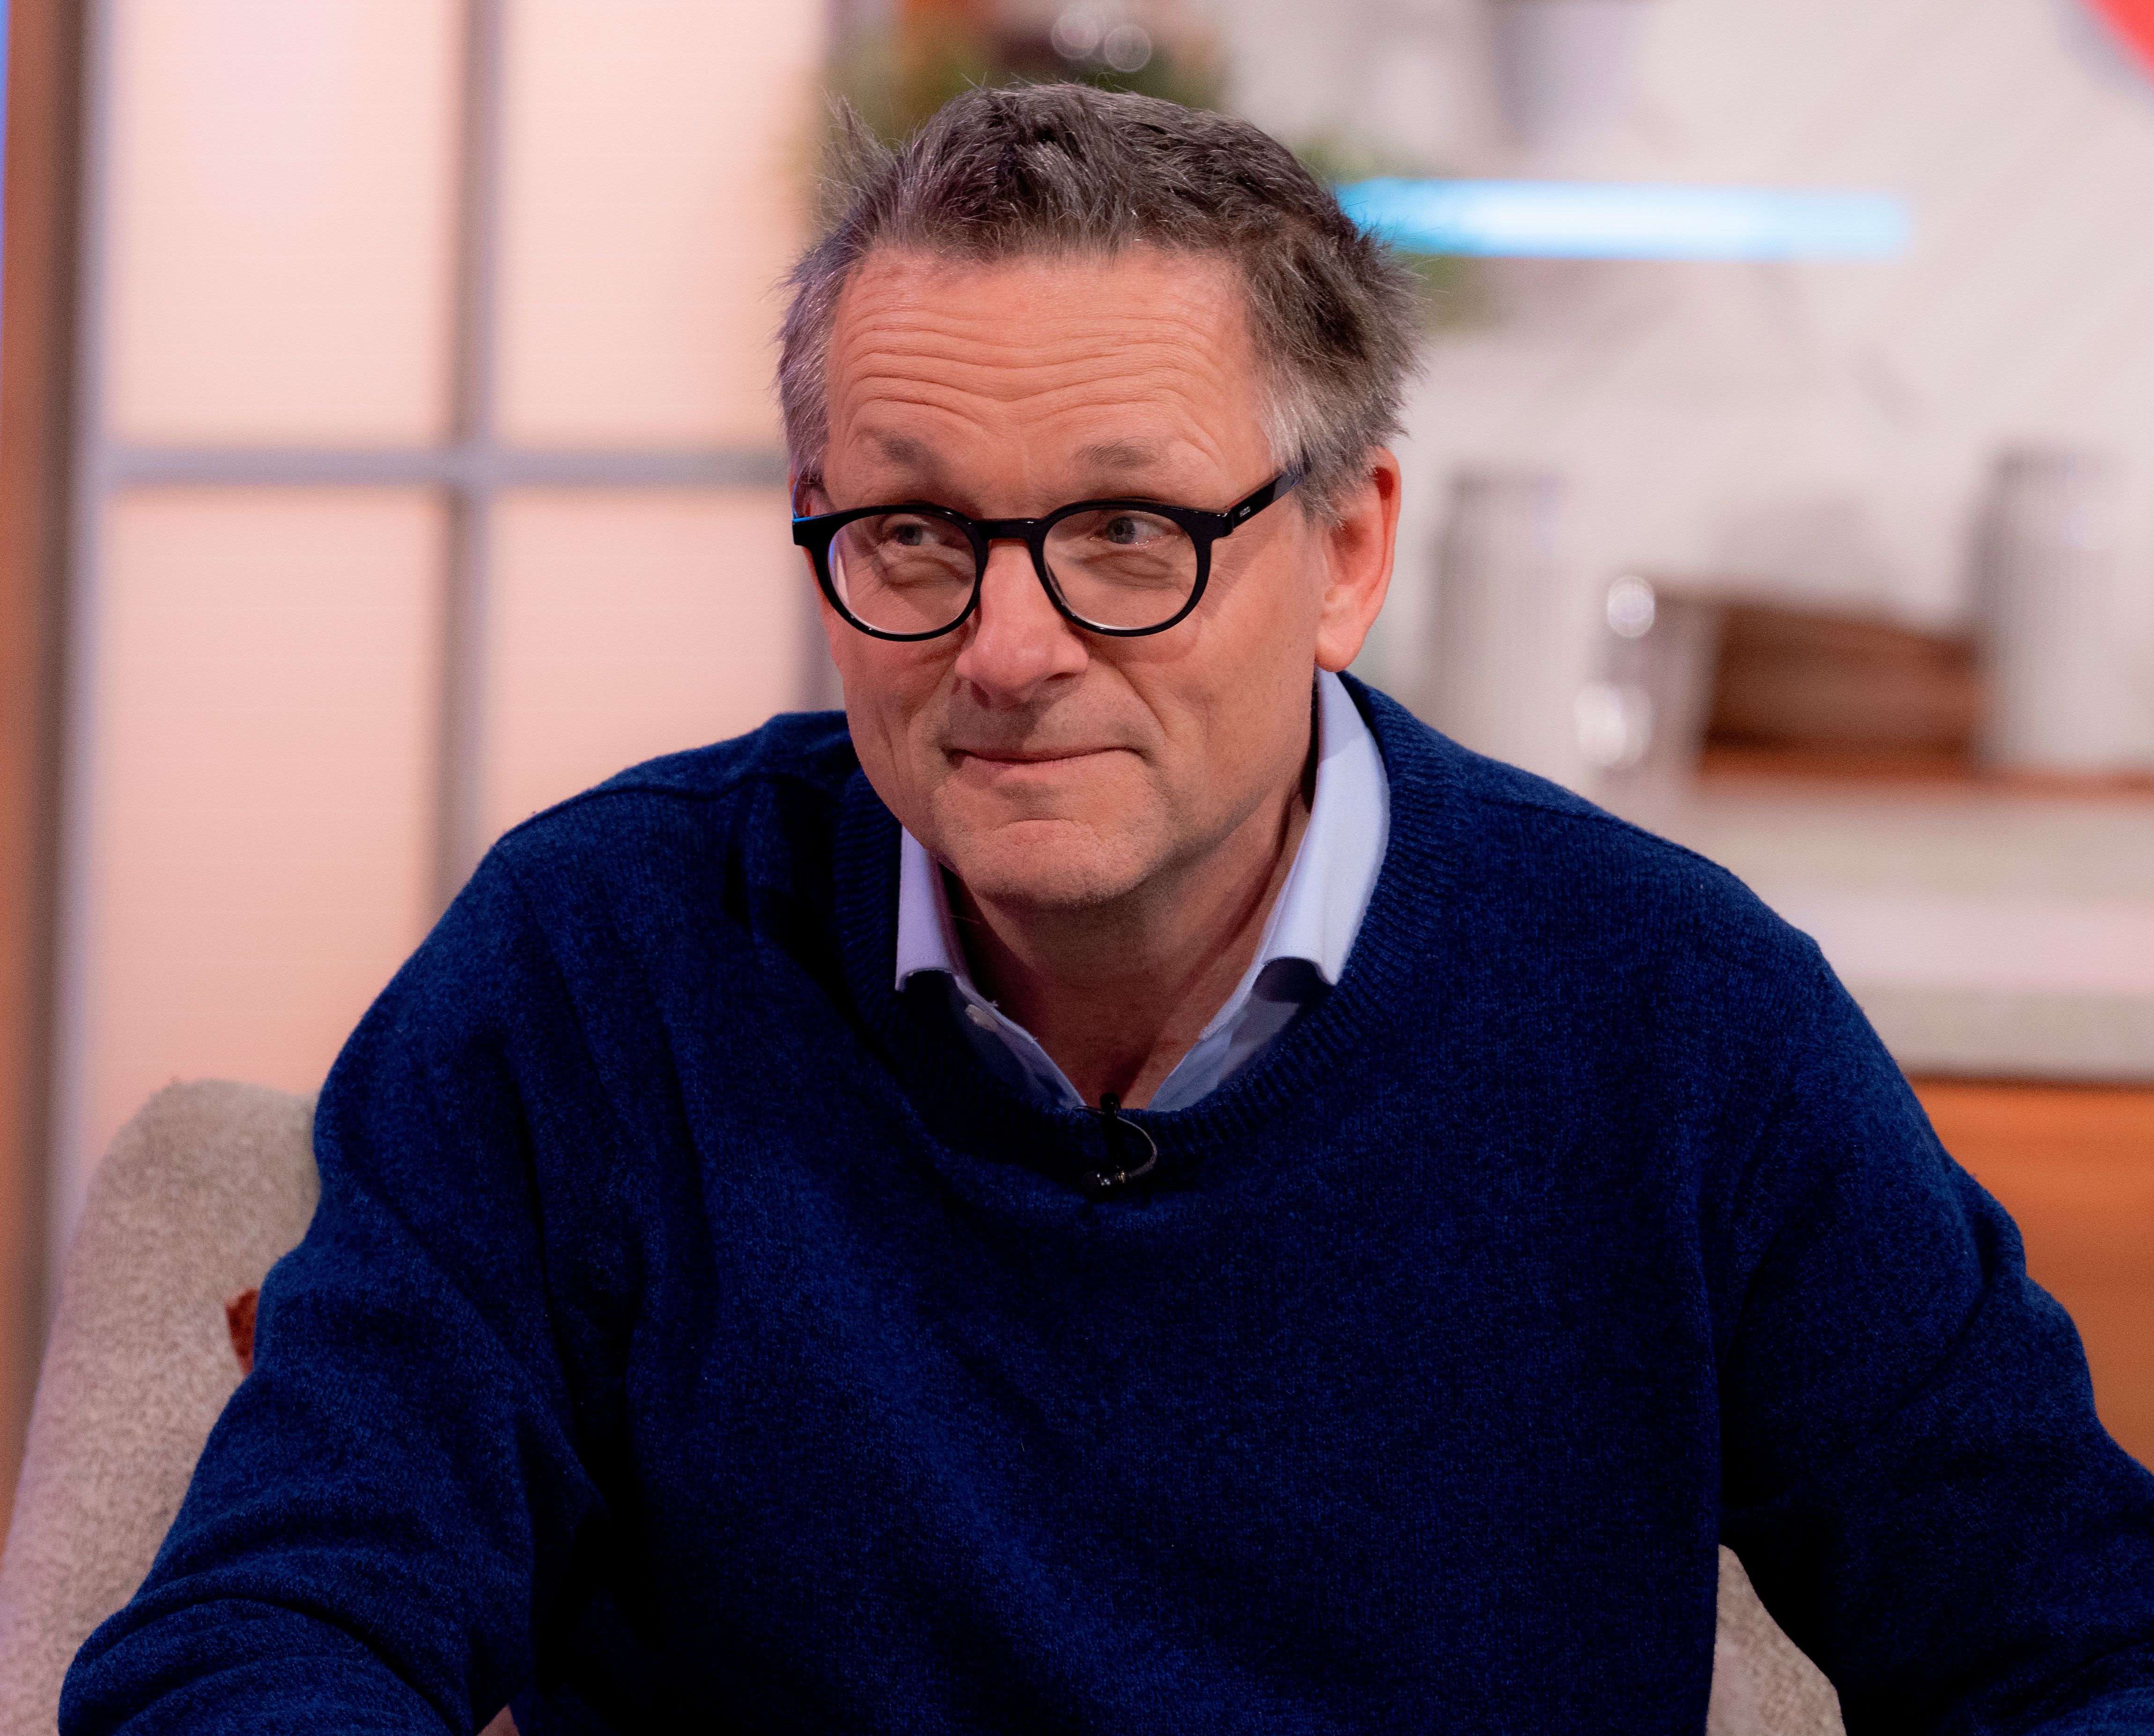 What we know as Dr Michael Mosley goes missing on Greek island